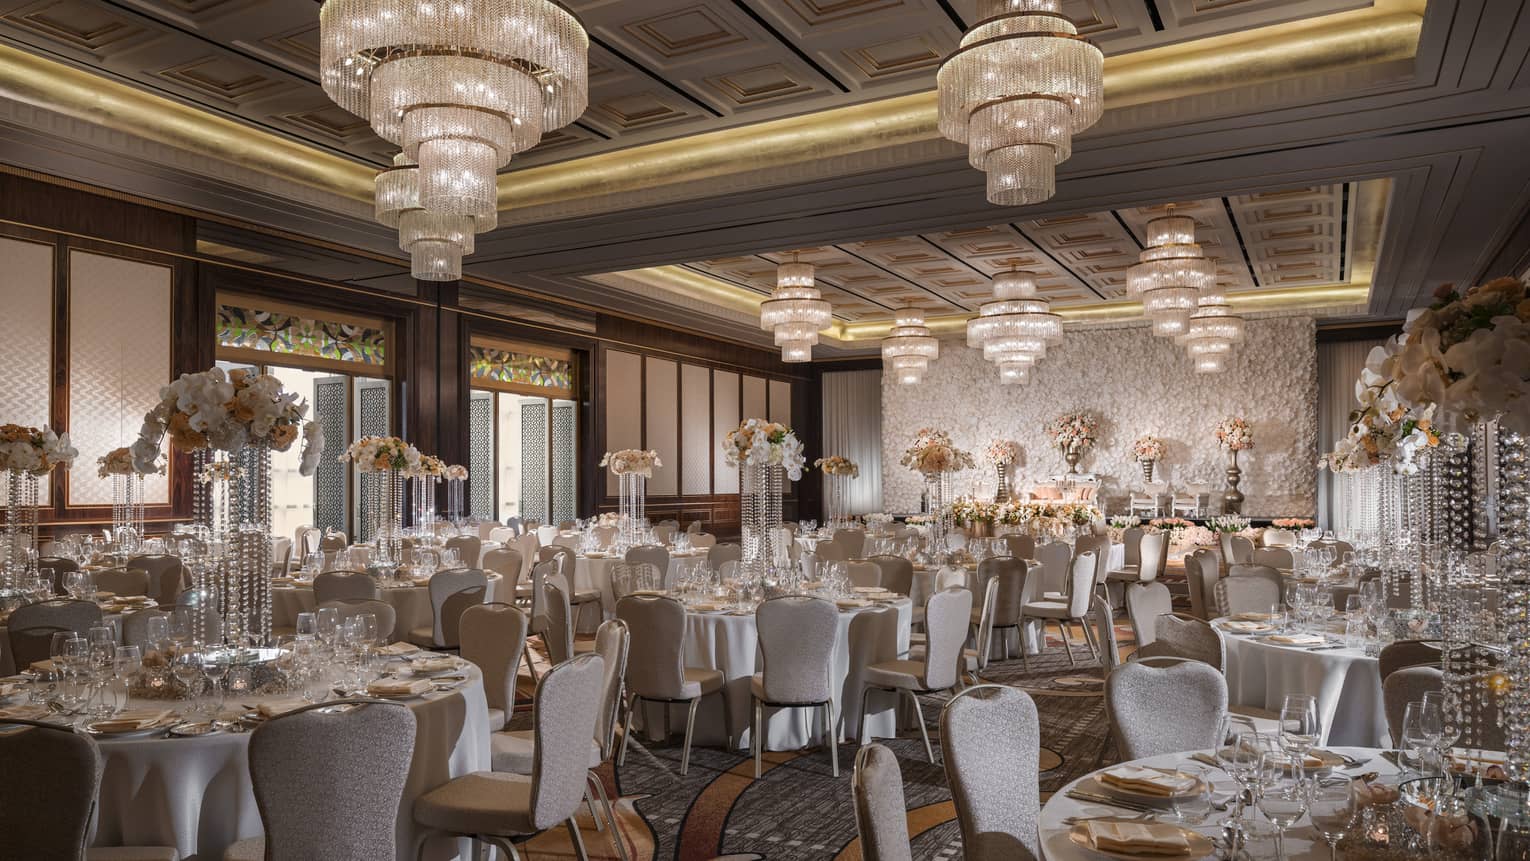 Large crystal chandeliers hang over round banquet tables in ballroom